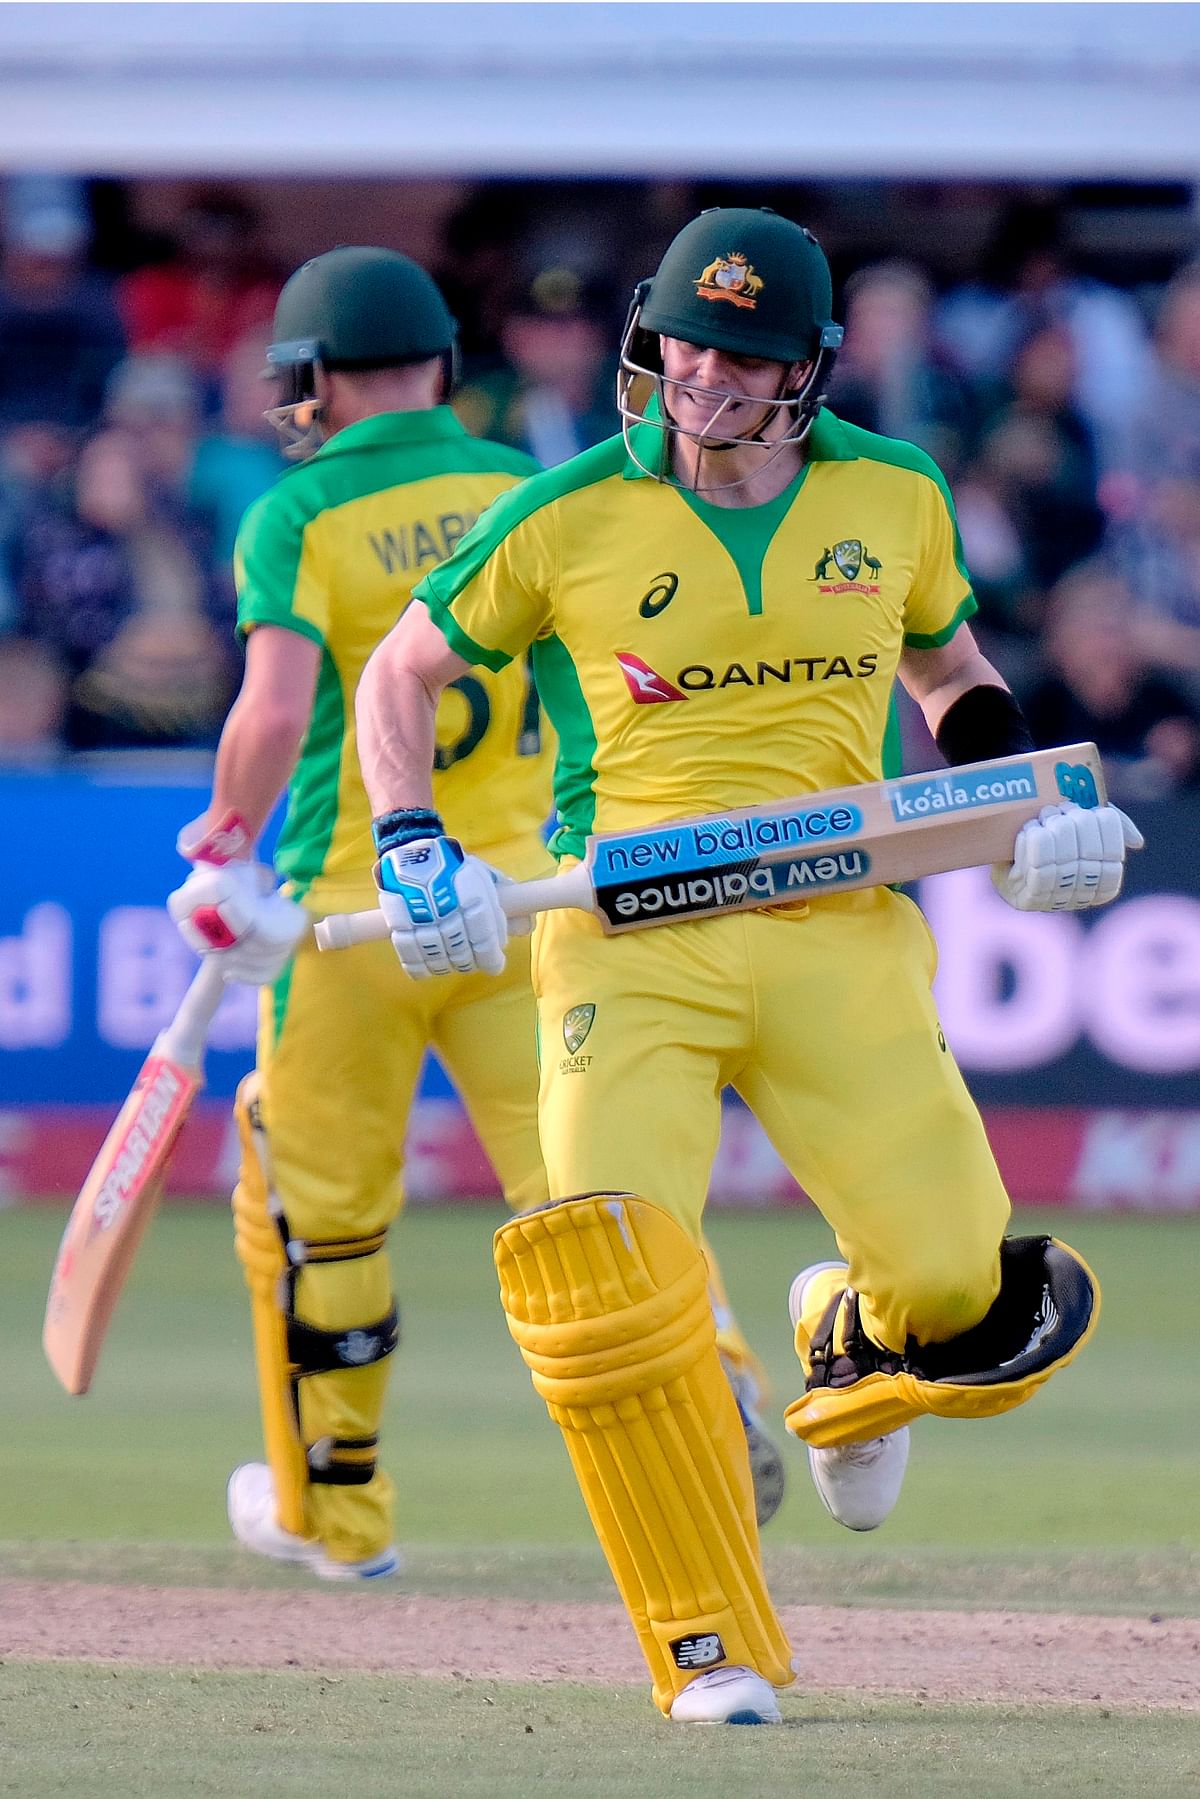 Steve Smith of Australia takes a single run during the second T20 international cricket match between South Africa and Australia at the St George`s Park Cricket Ground in Port Elizabeth on 23 February 2020. Photo: AFP